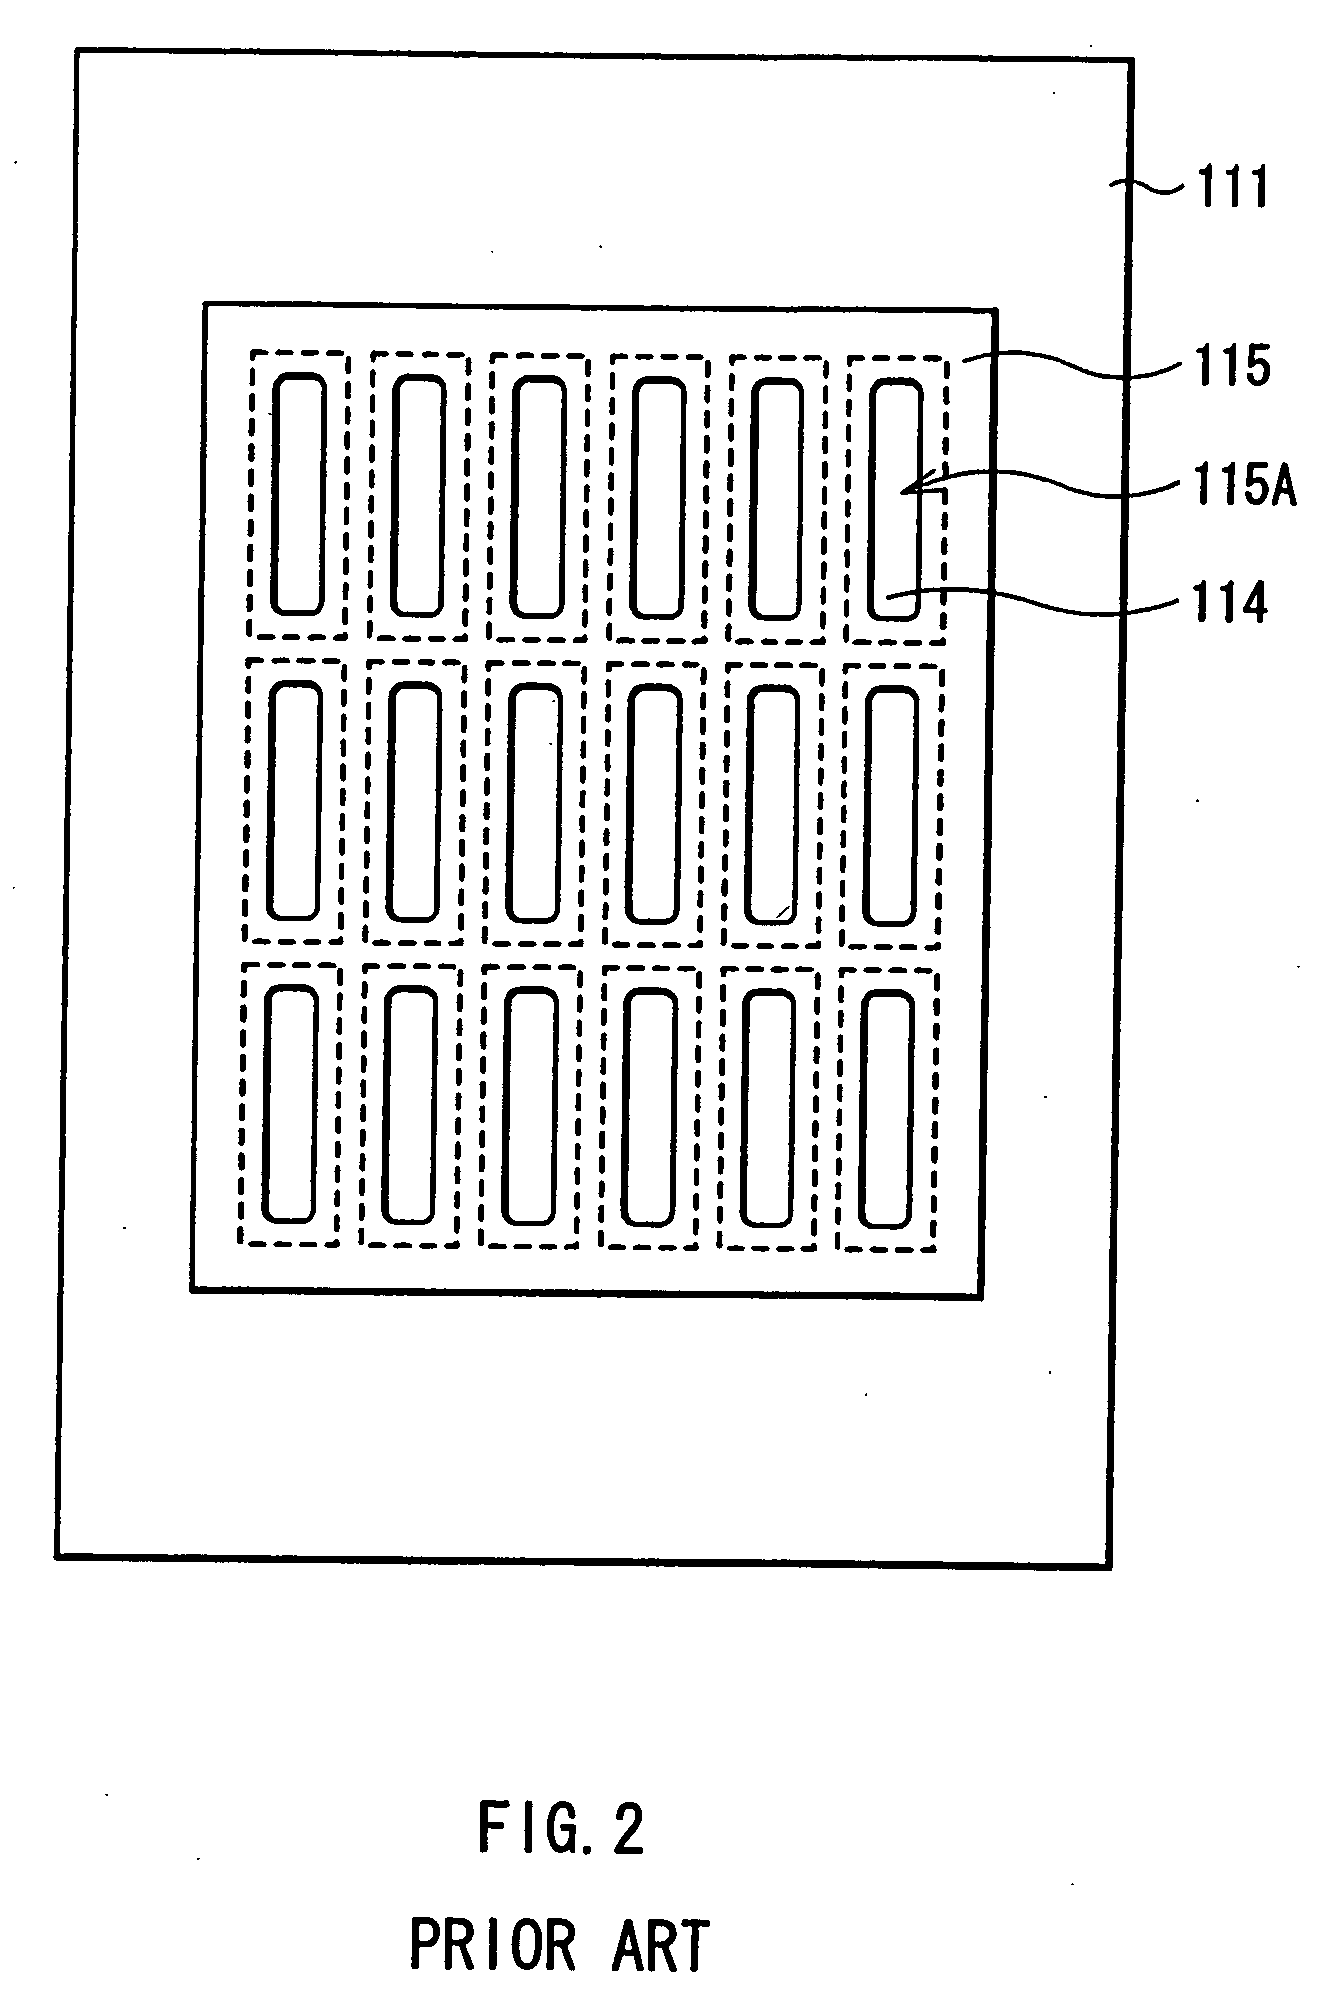 Deposition mask, method for manufacturing display unit using it, and display unit